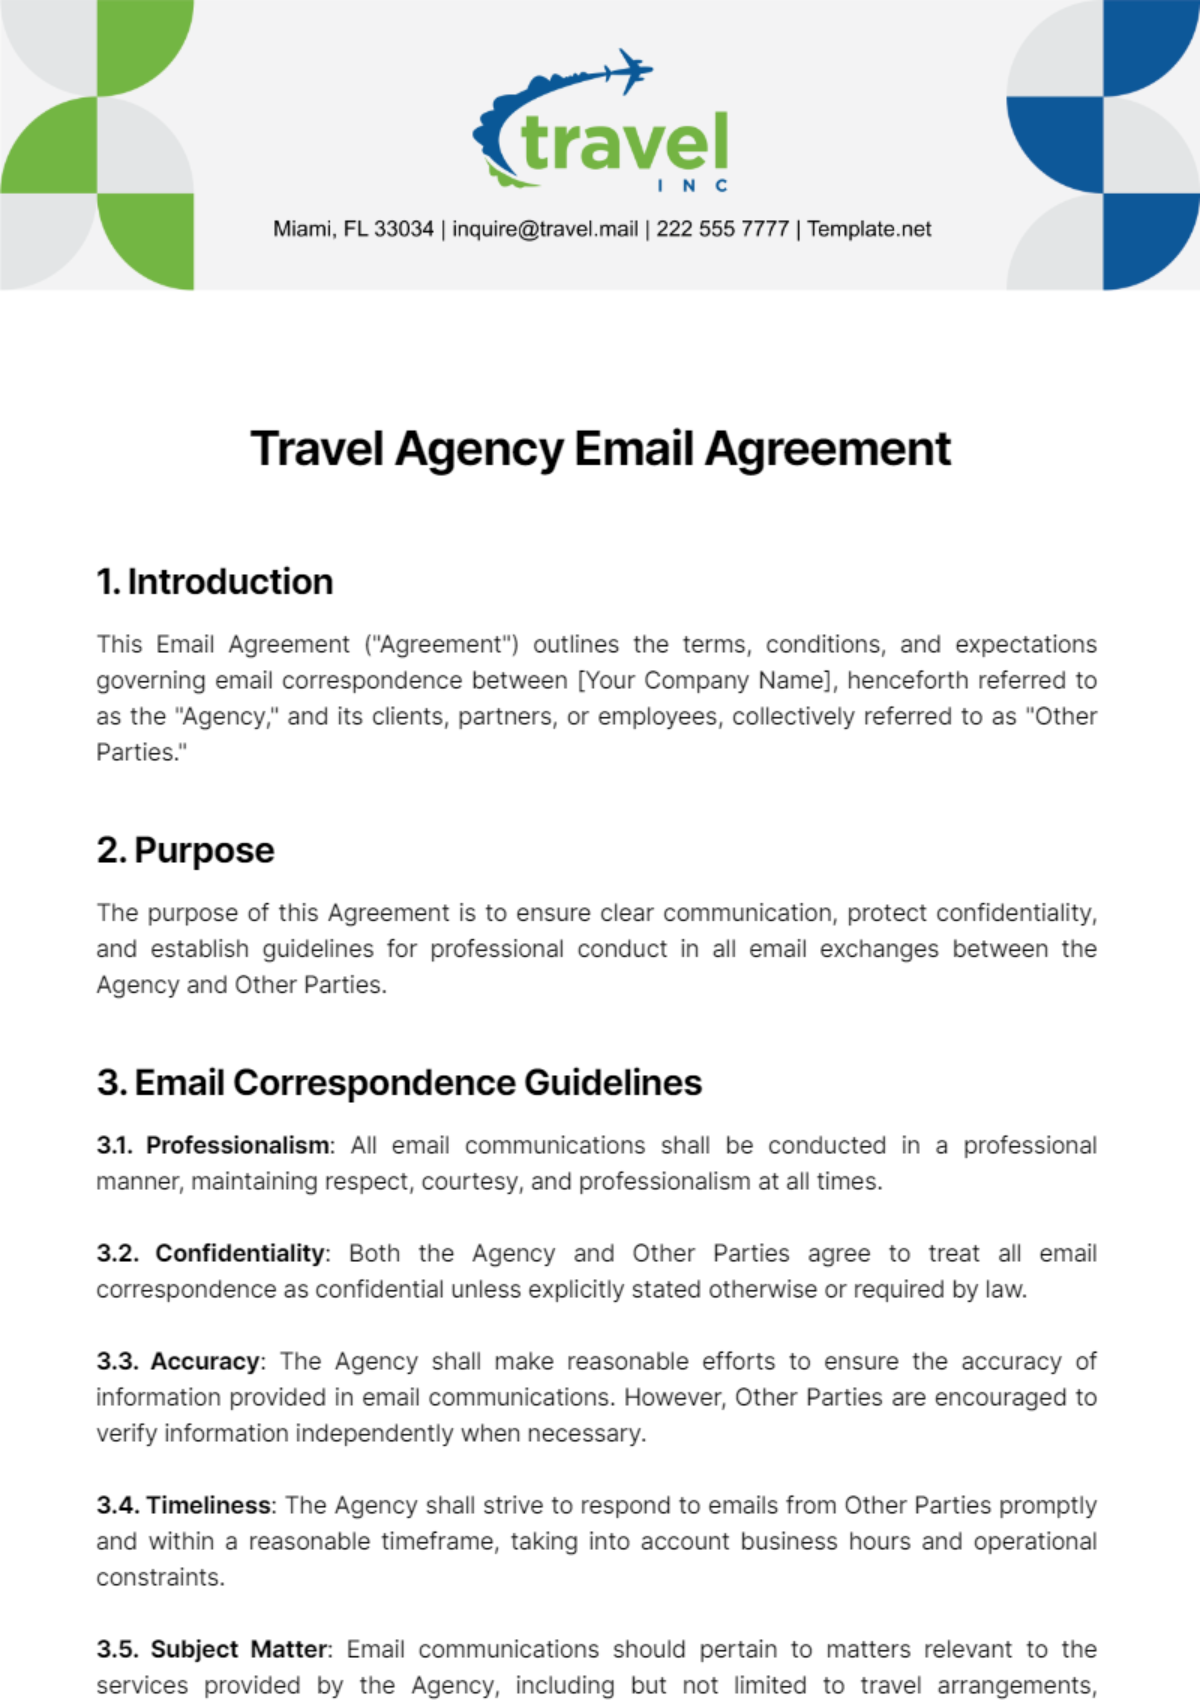 Travel Agency Email Agreement Template